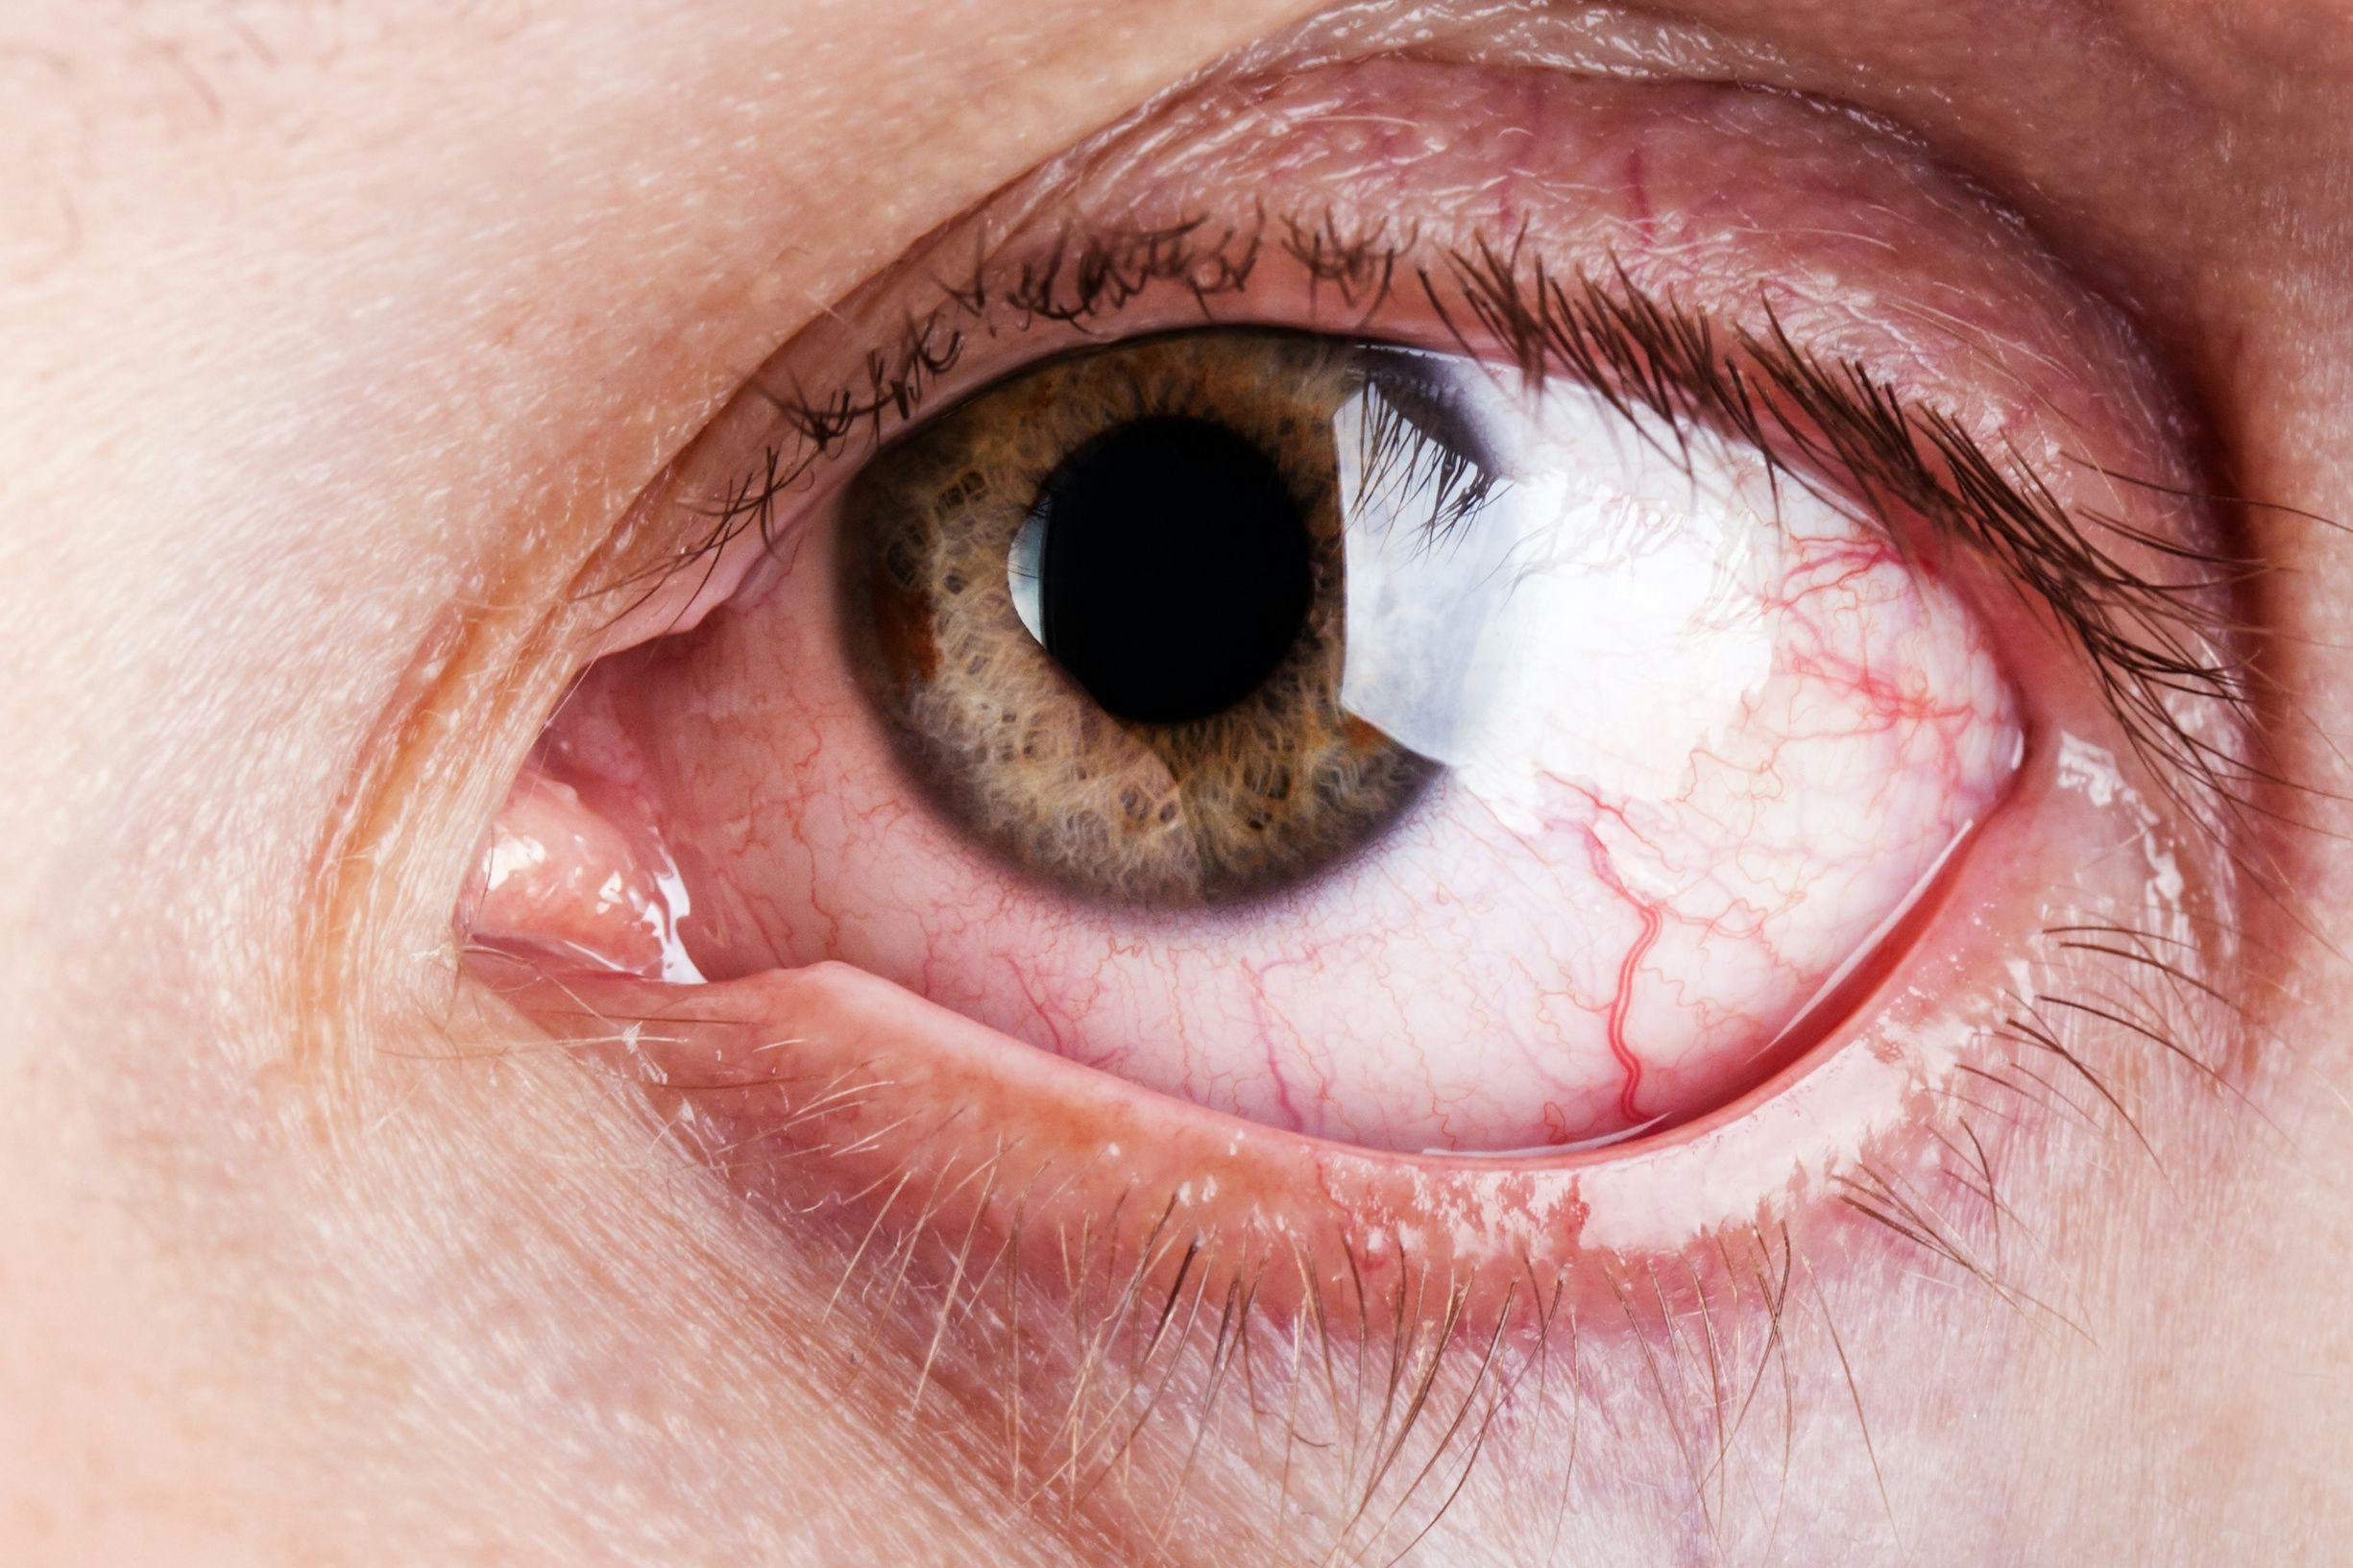 Patient with dry eye disease (DED) | Image Credit: ia_64 - stock.adobe.com